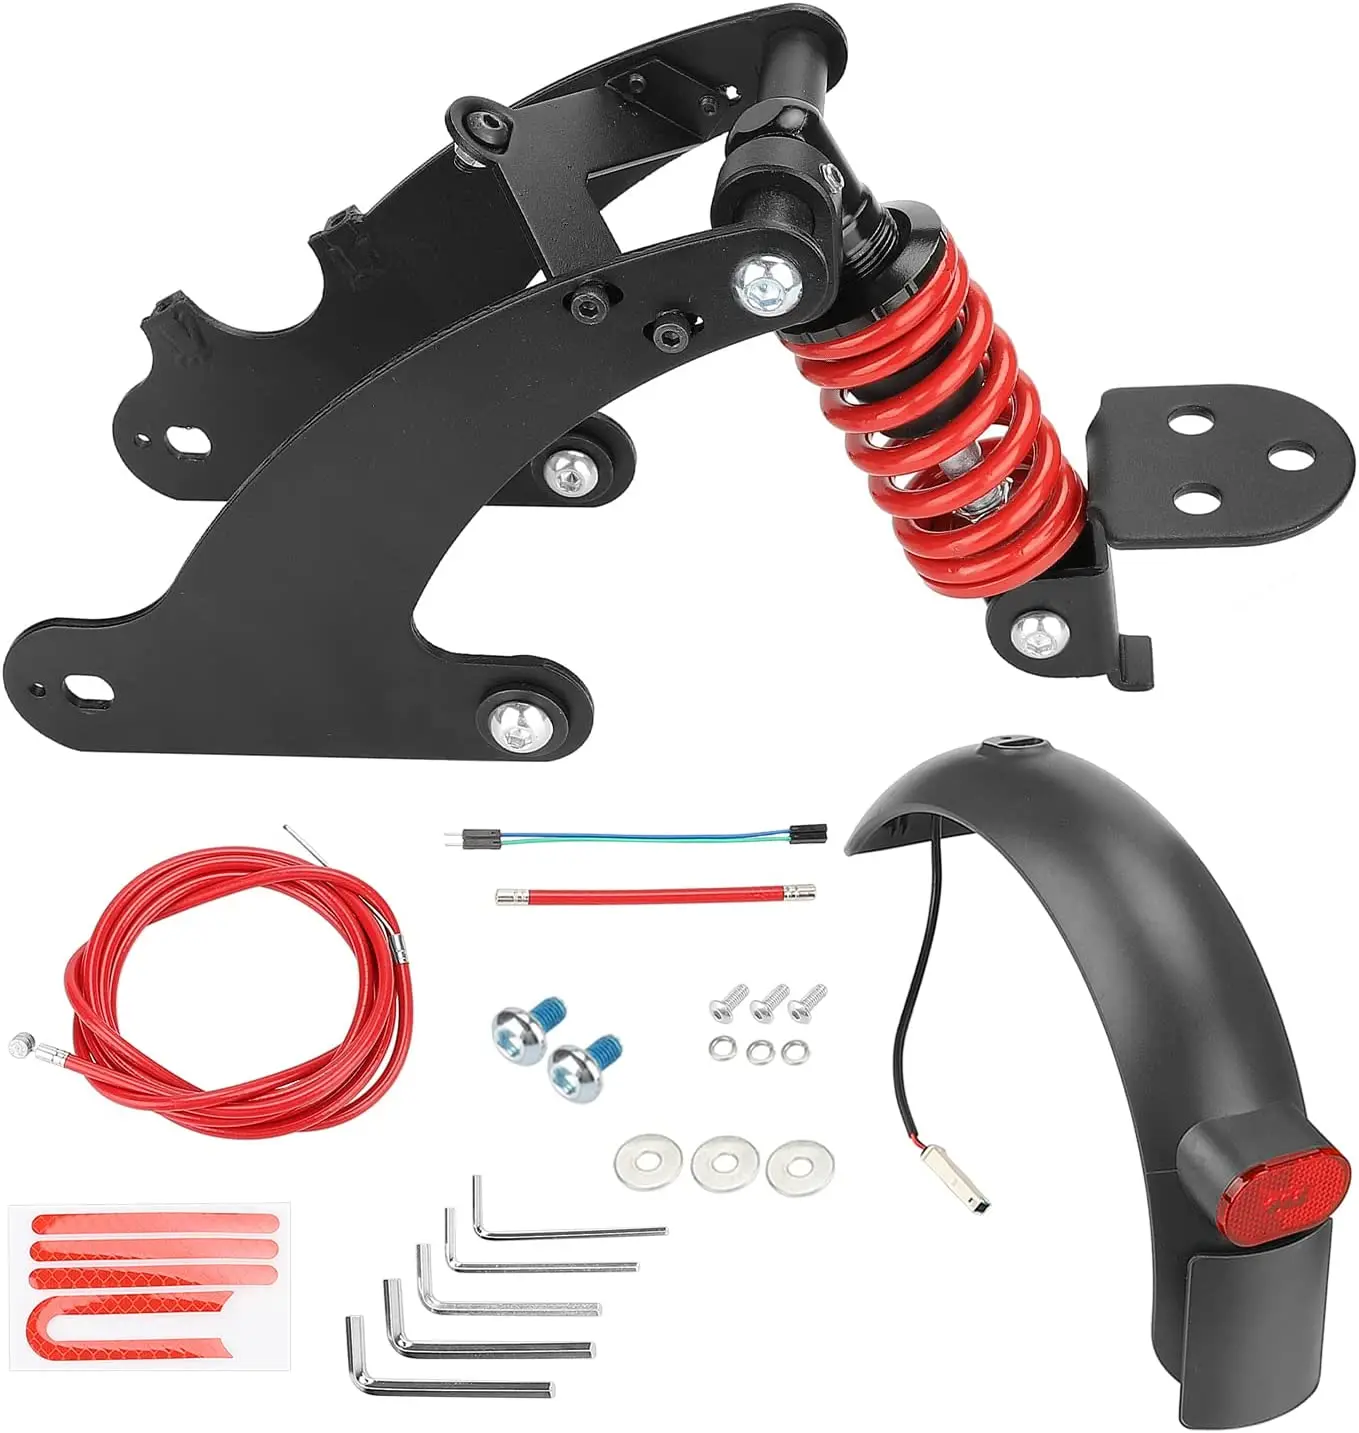 Ulip Rear Suspension Kit Shock Absorber Fender Taillight for Xiaomi M365 Pro Pro2 1S MI3 Essential Lite Scooter Accessories